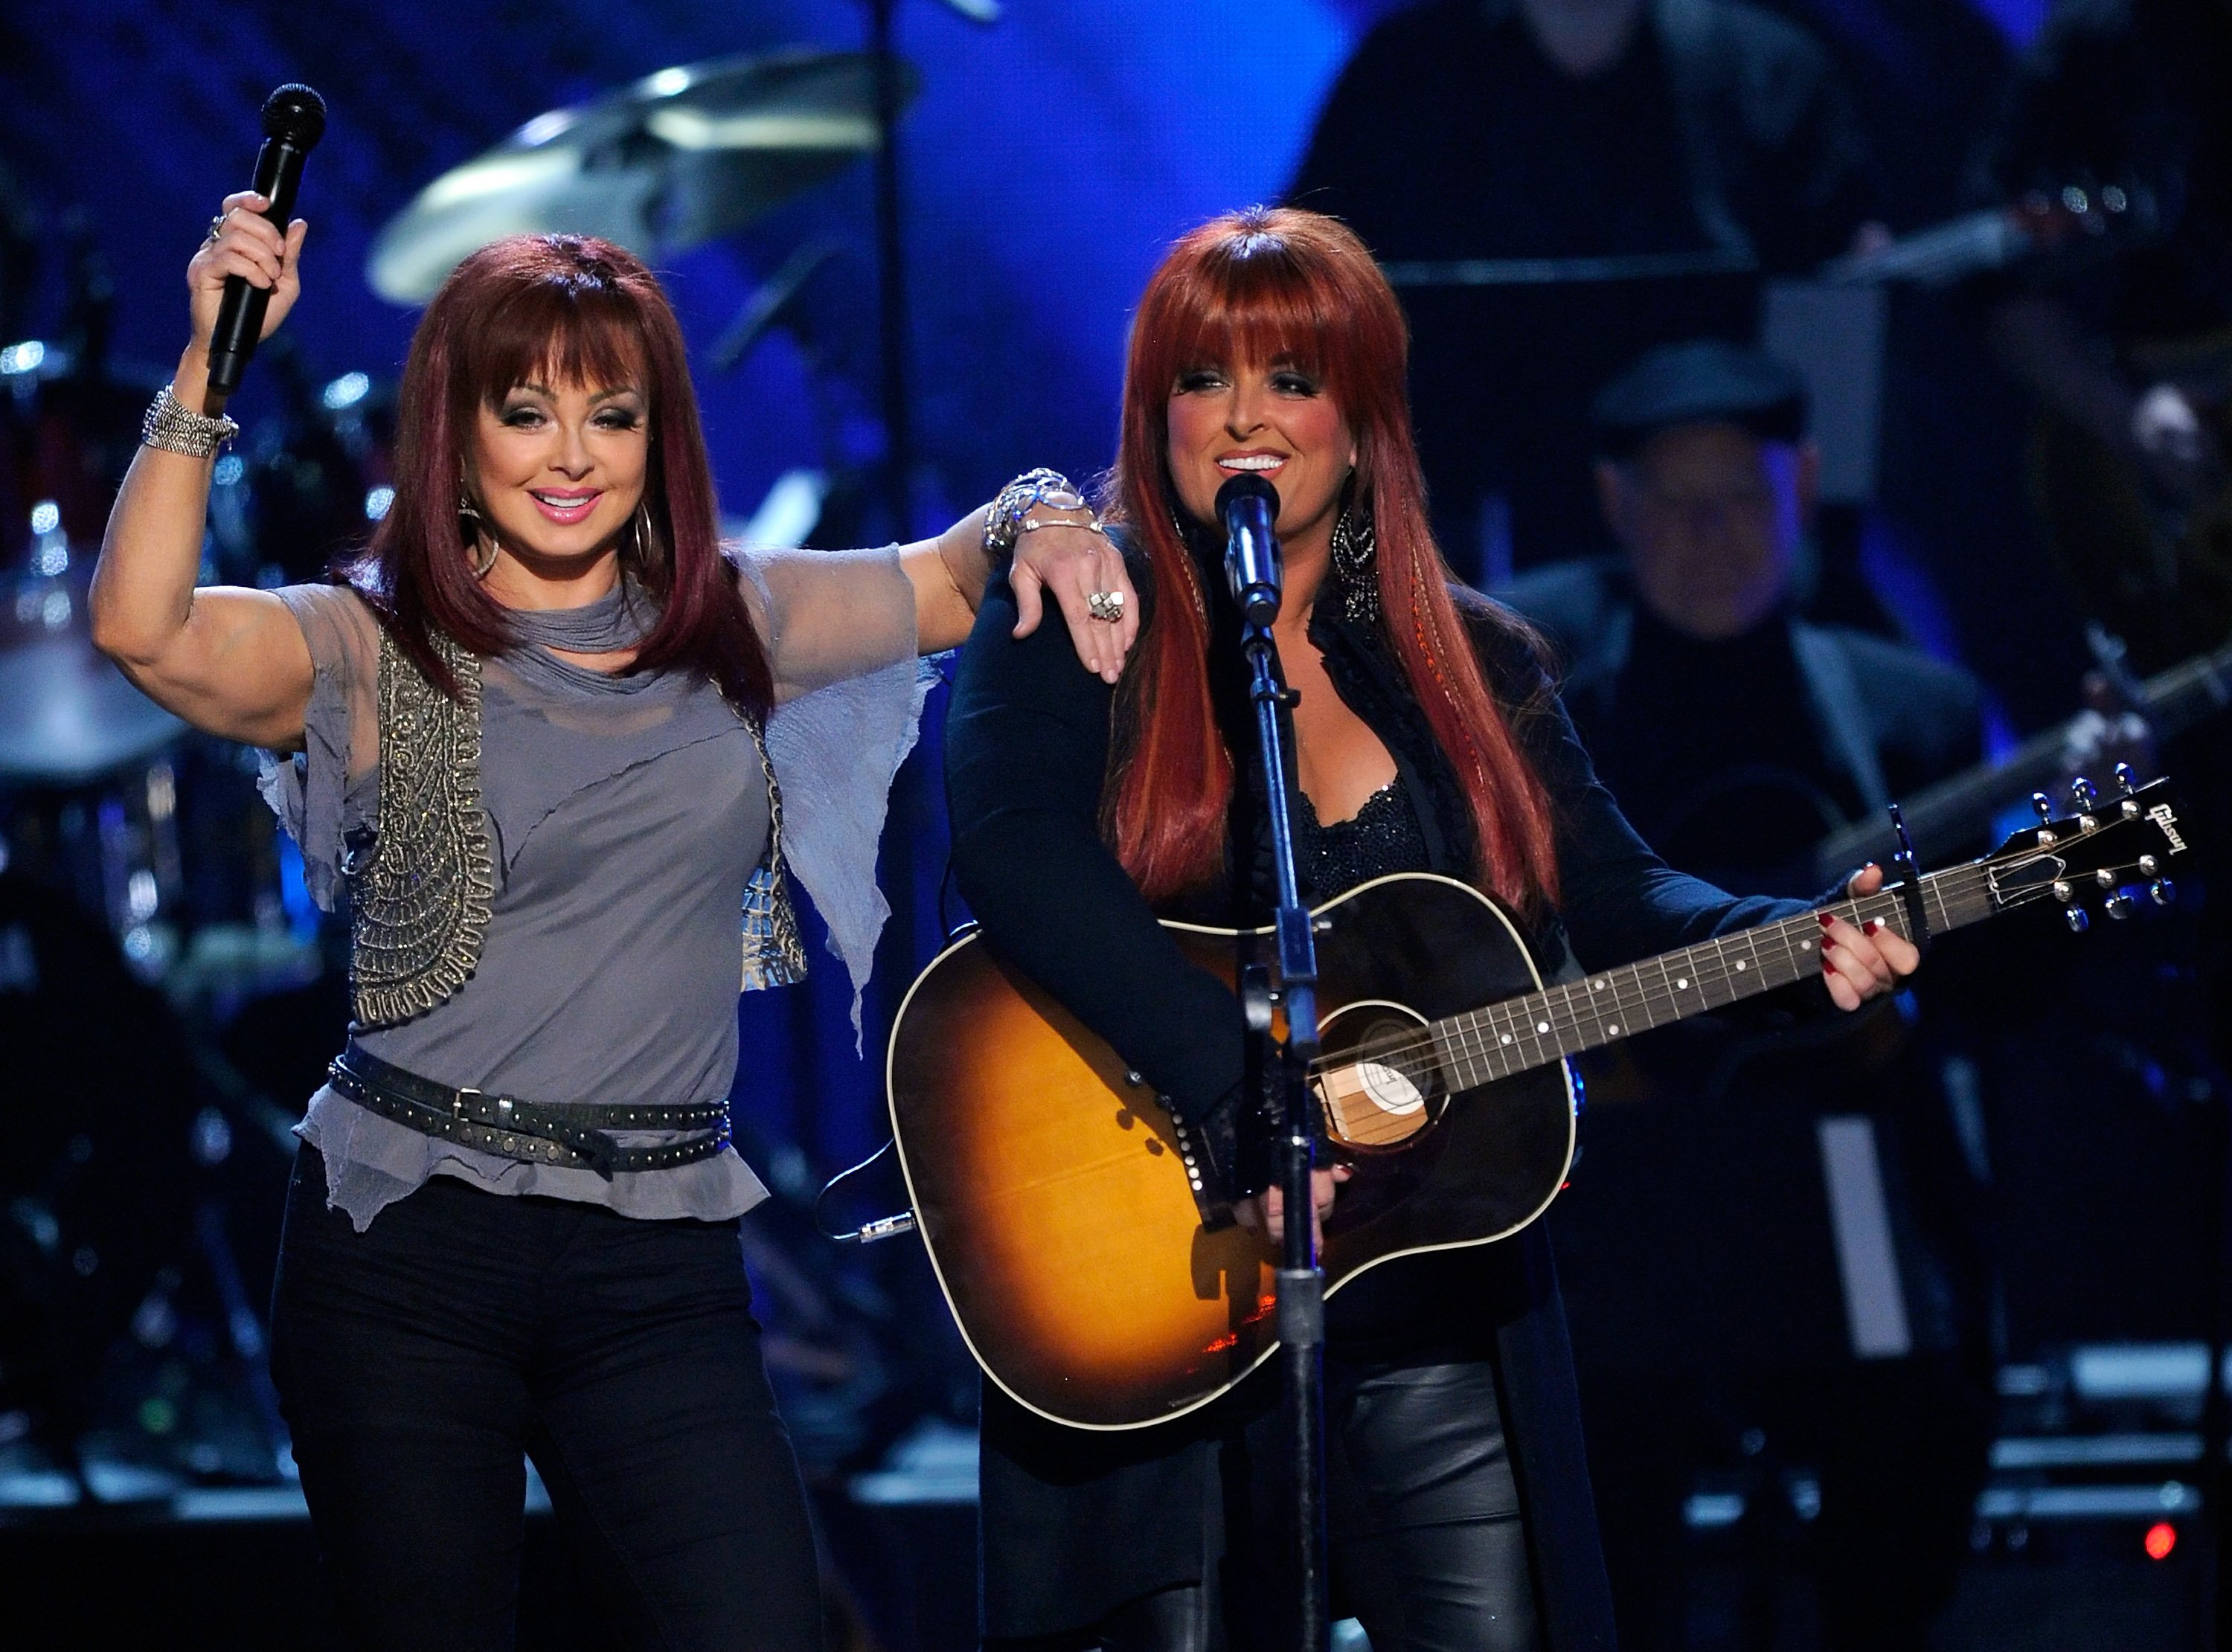 Musicians Naomi Judd (L) and Wynonna Judd at the MGM Grand Garden Arena on April 4, 2011, in Las Vegas, Nevada. | Source: Getty Images